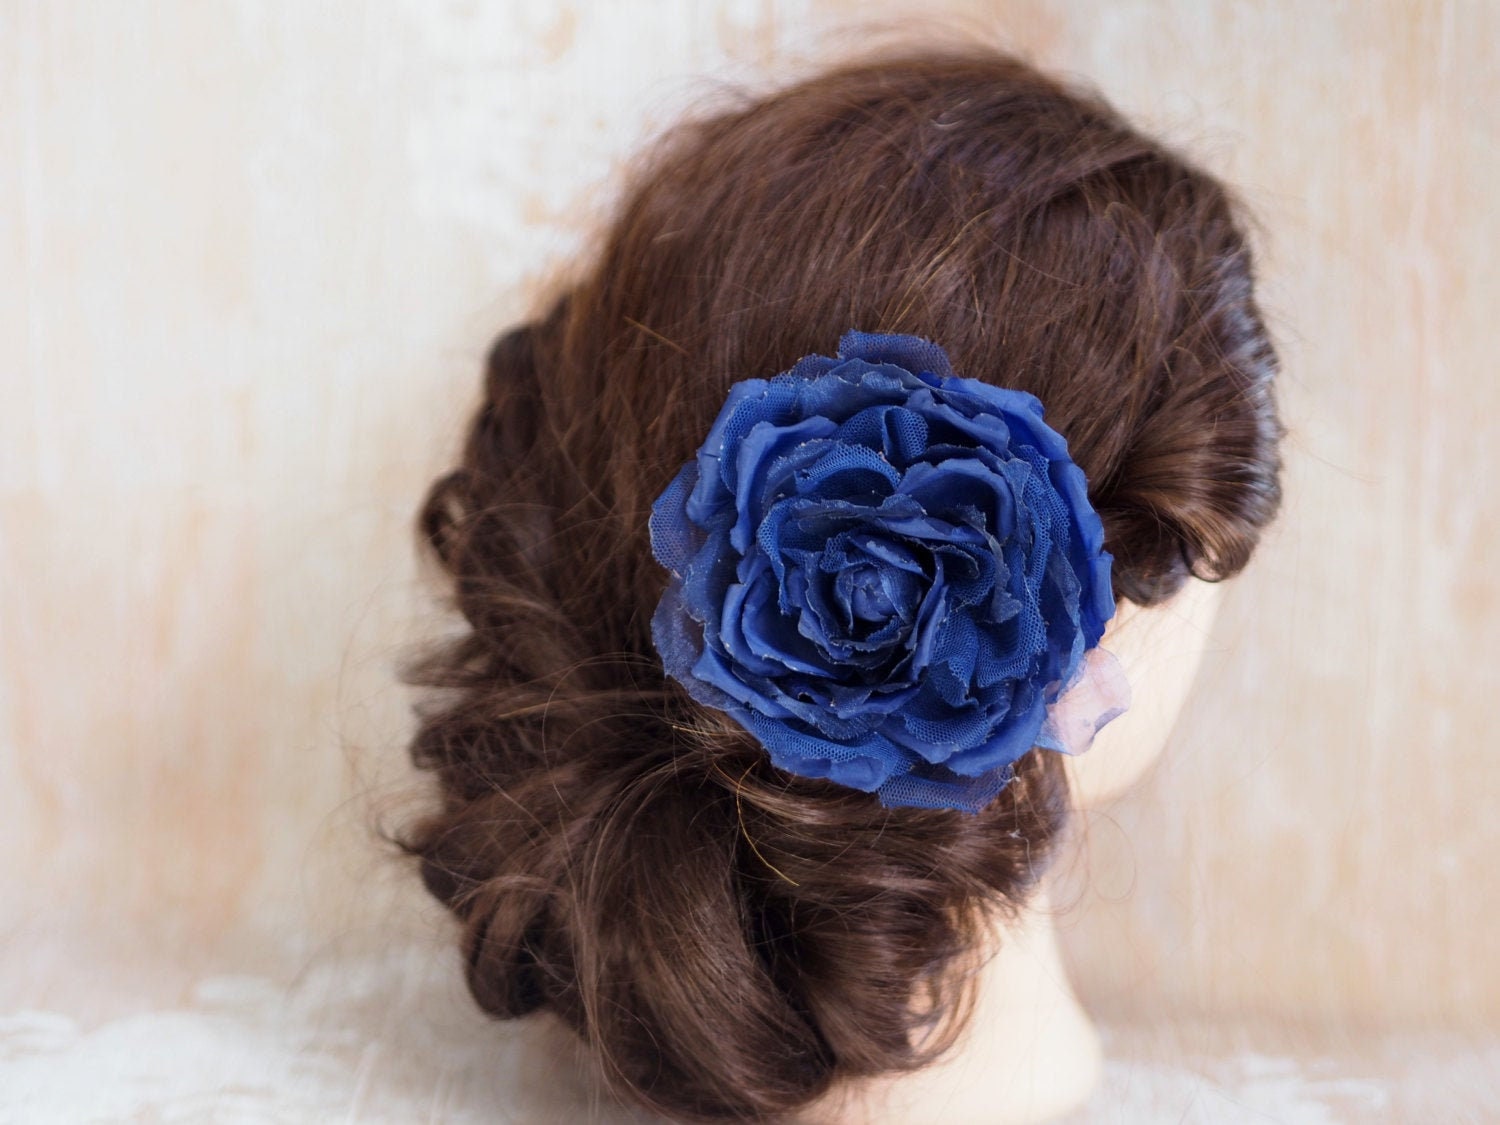 2. Navy Blue Flower Hair Clip for Prom - wide 6